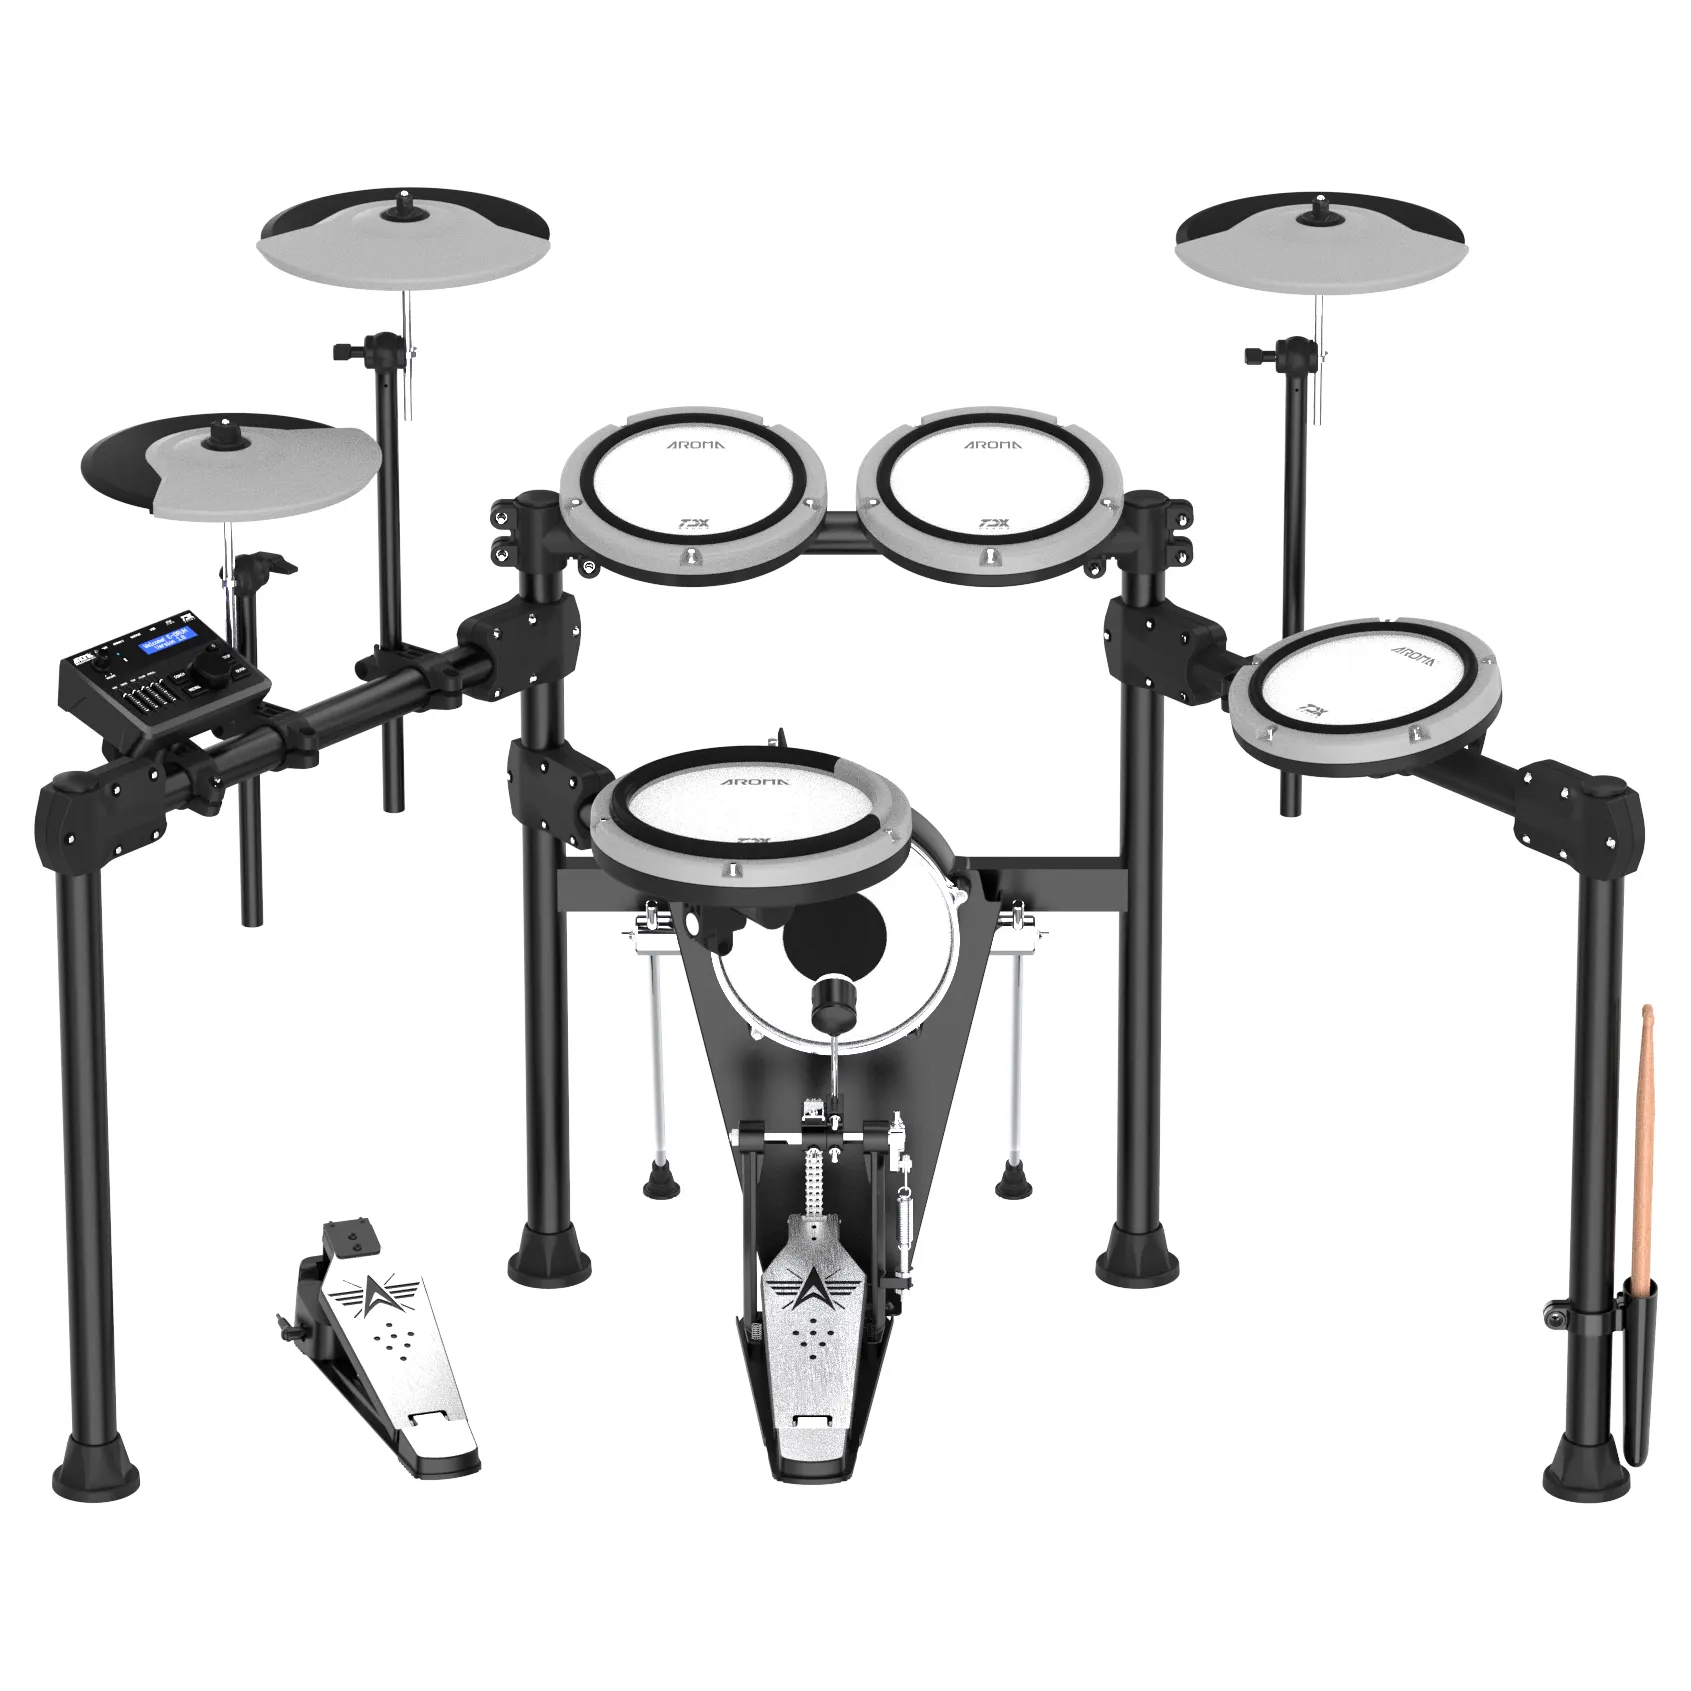 Aroma Electric Drum set TDX-23II all mesh 5 drum,3cymbals Built in Bluetooth